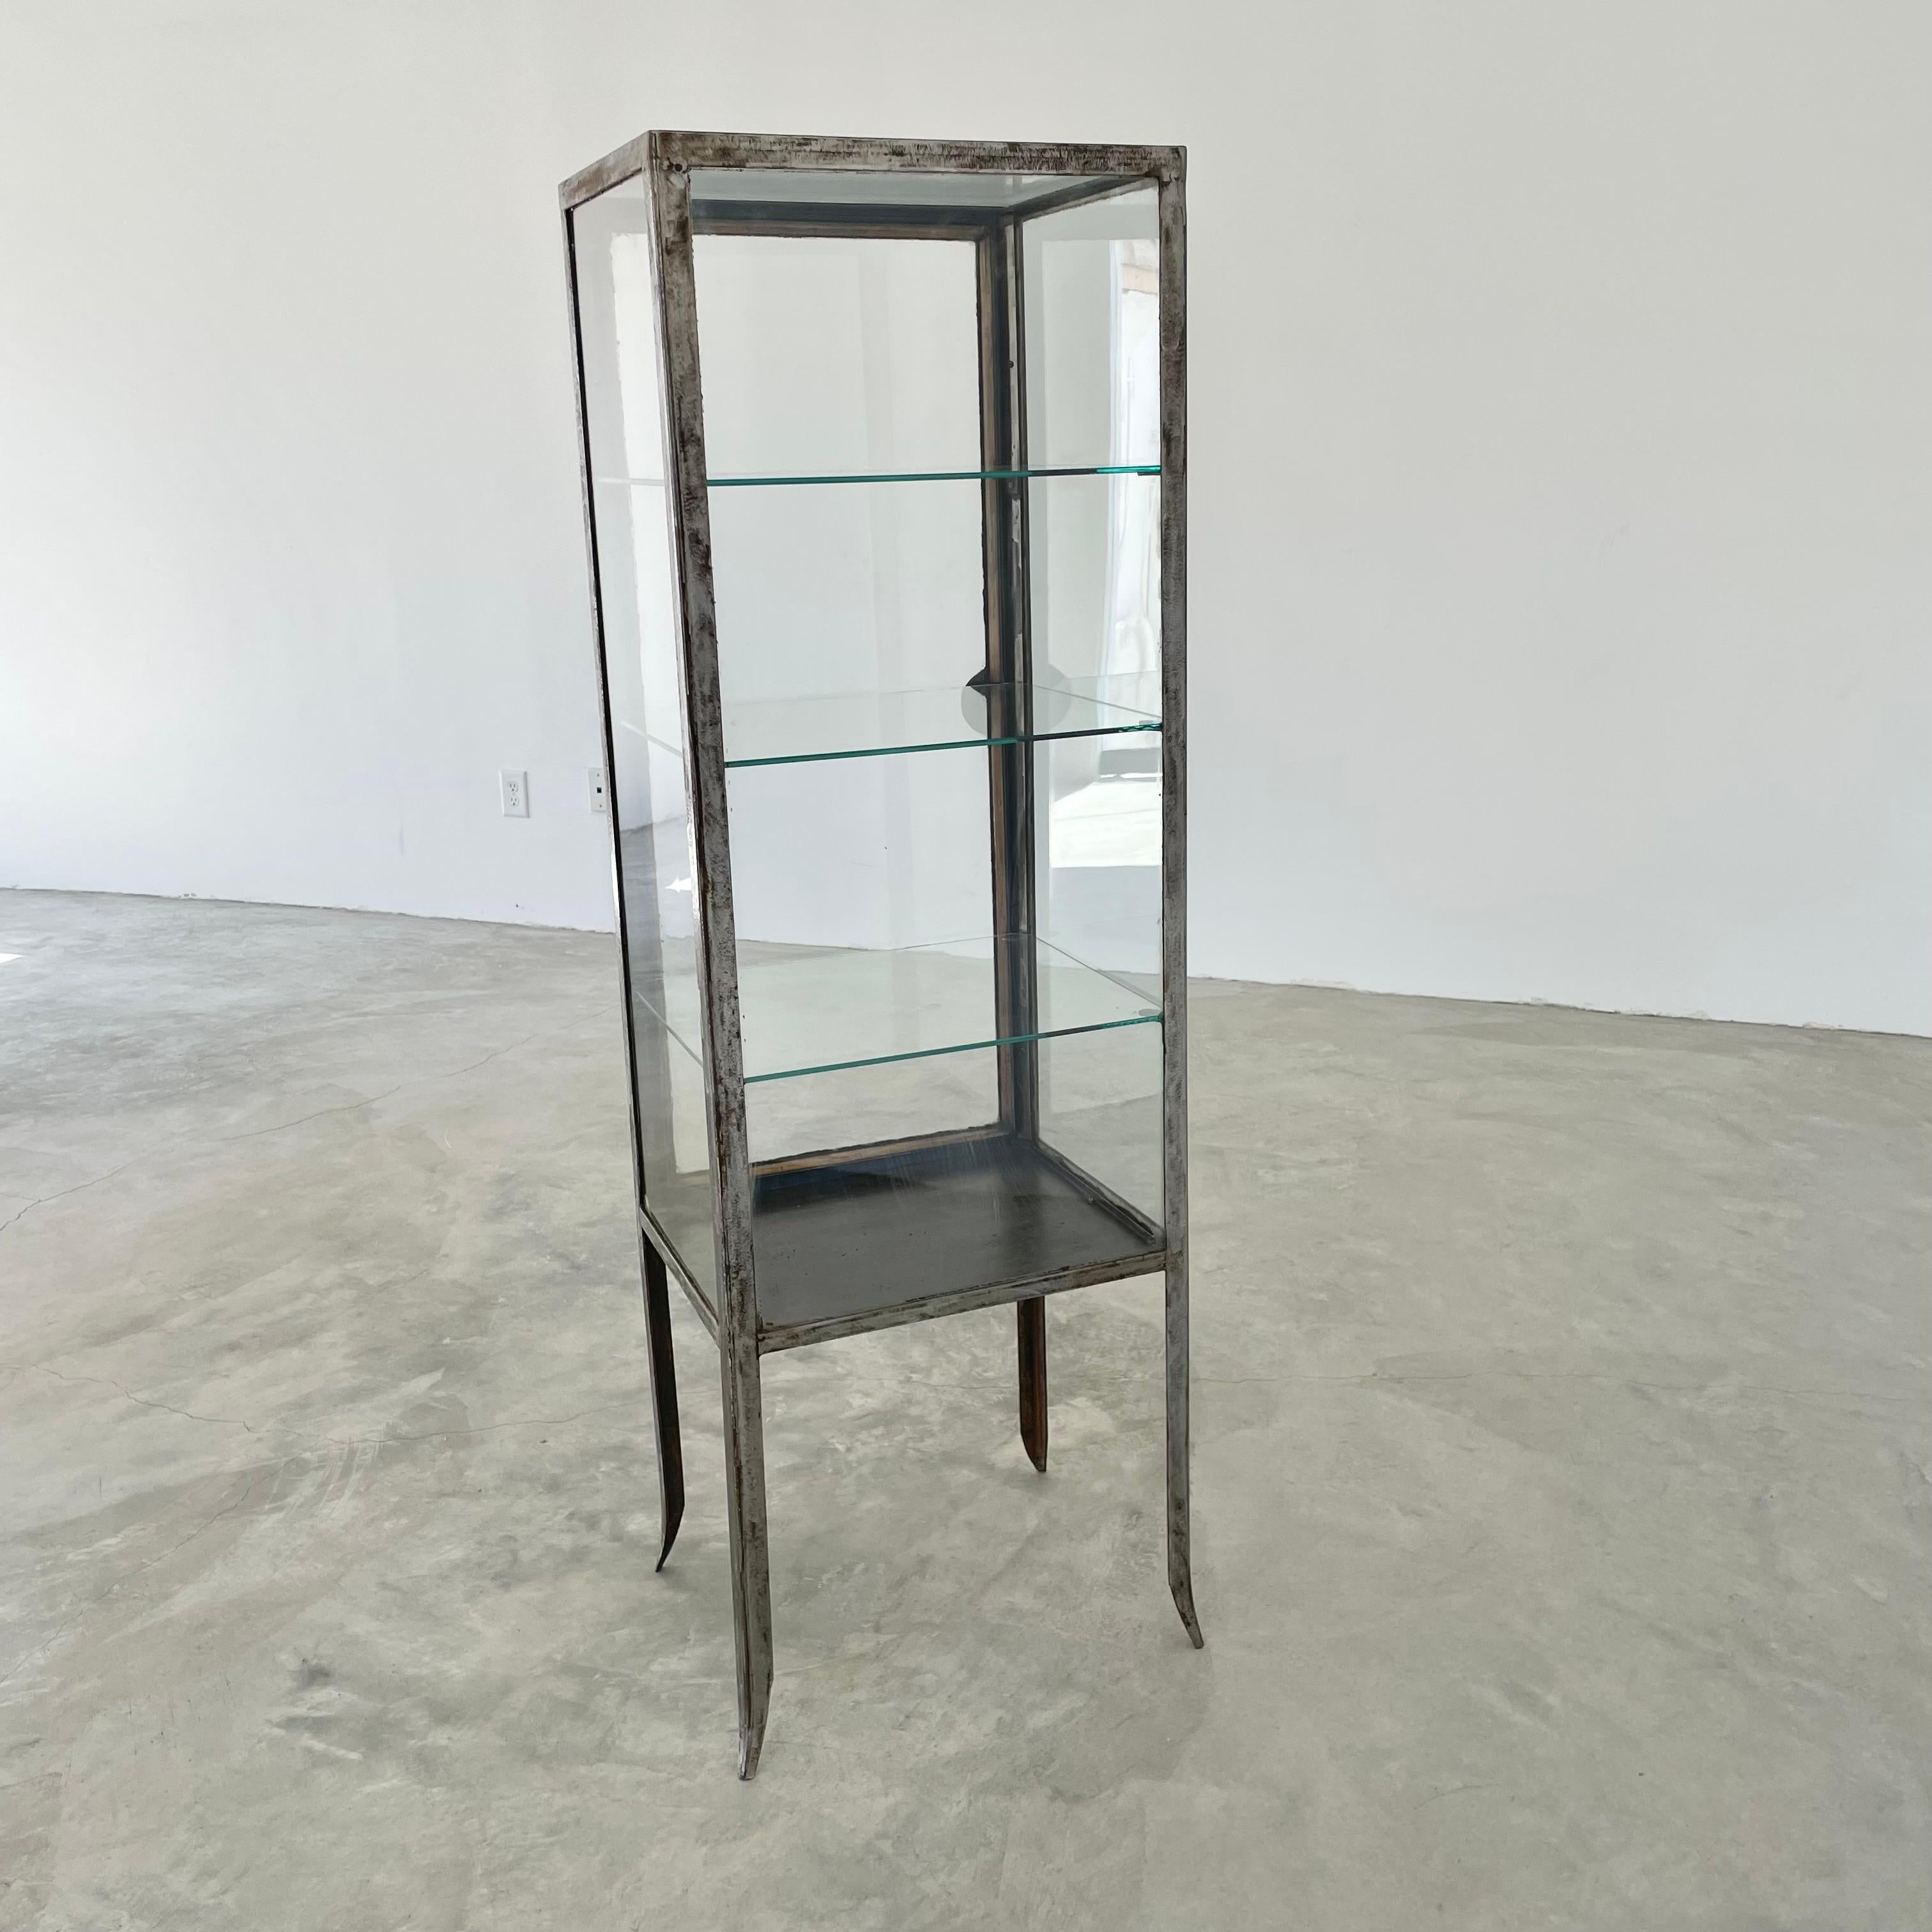 Iron and Glass Vitrine, 1920s Argentina For Sale 8